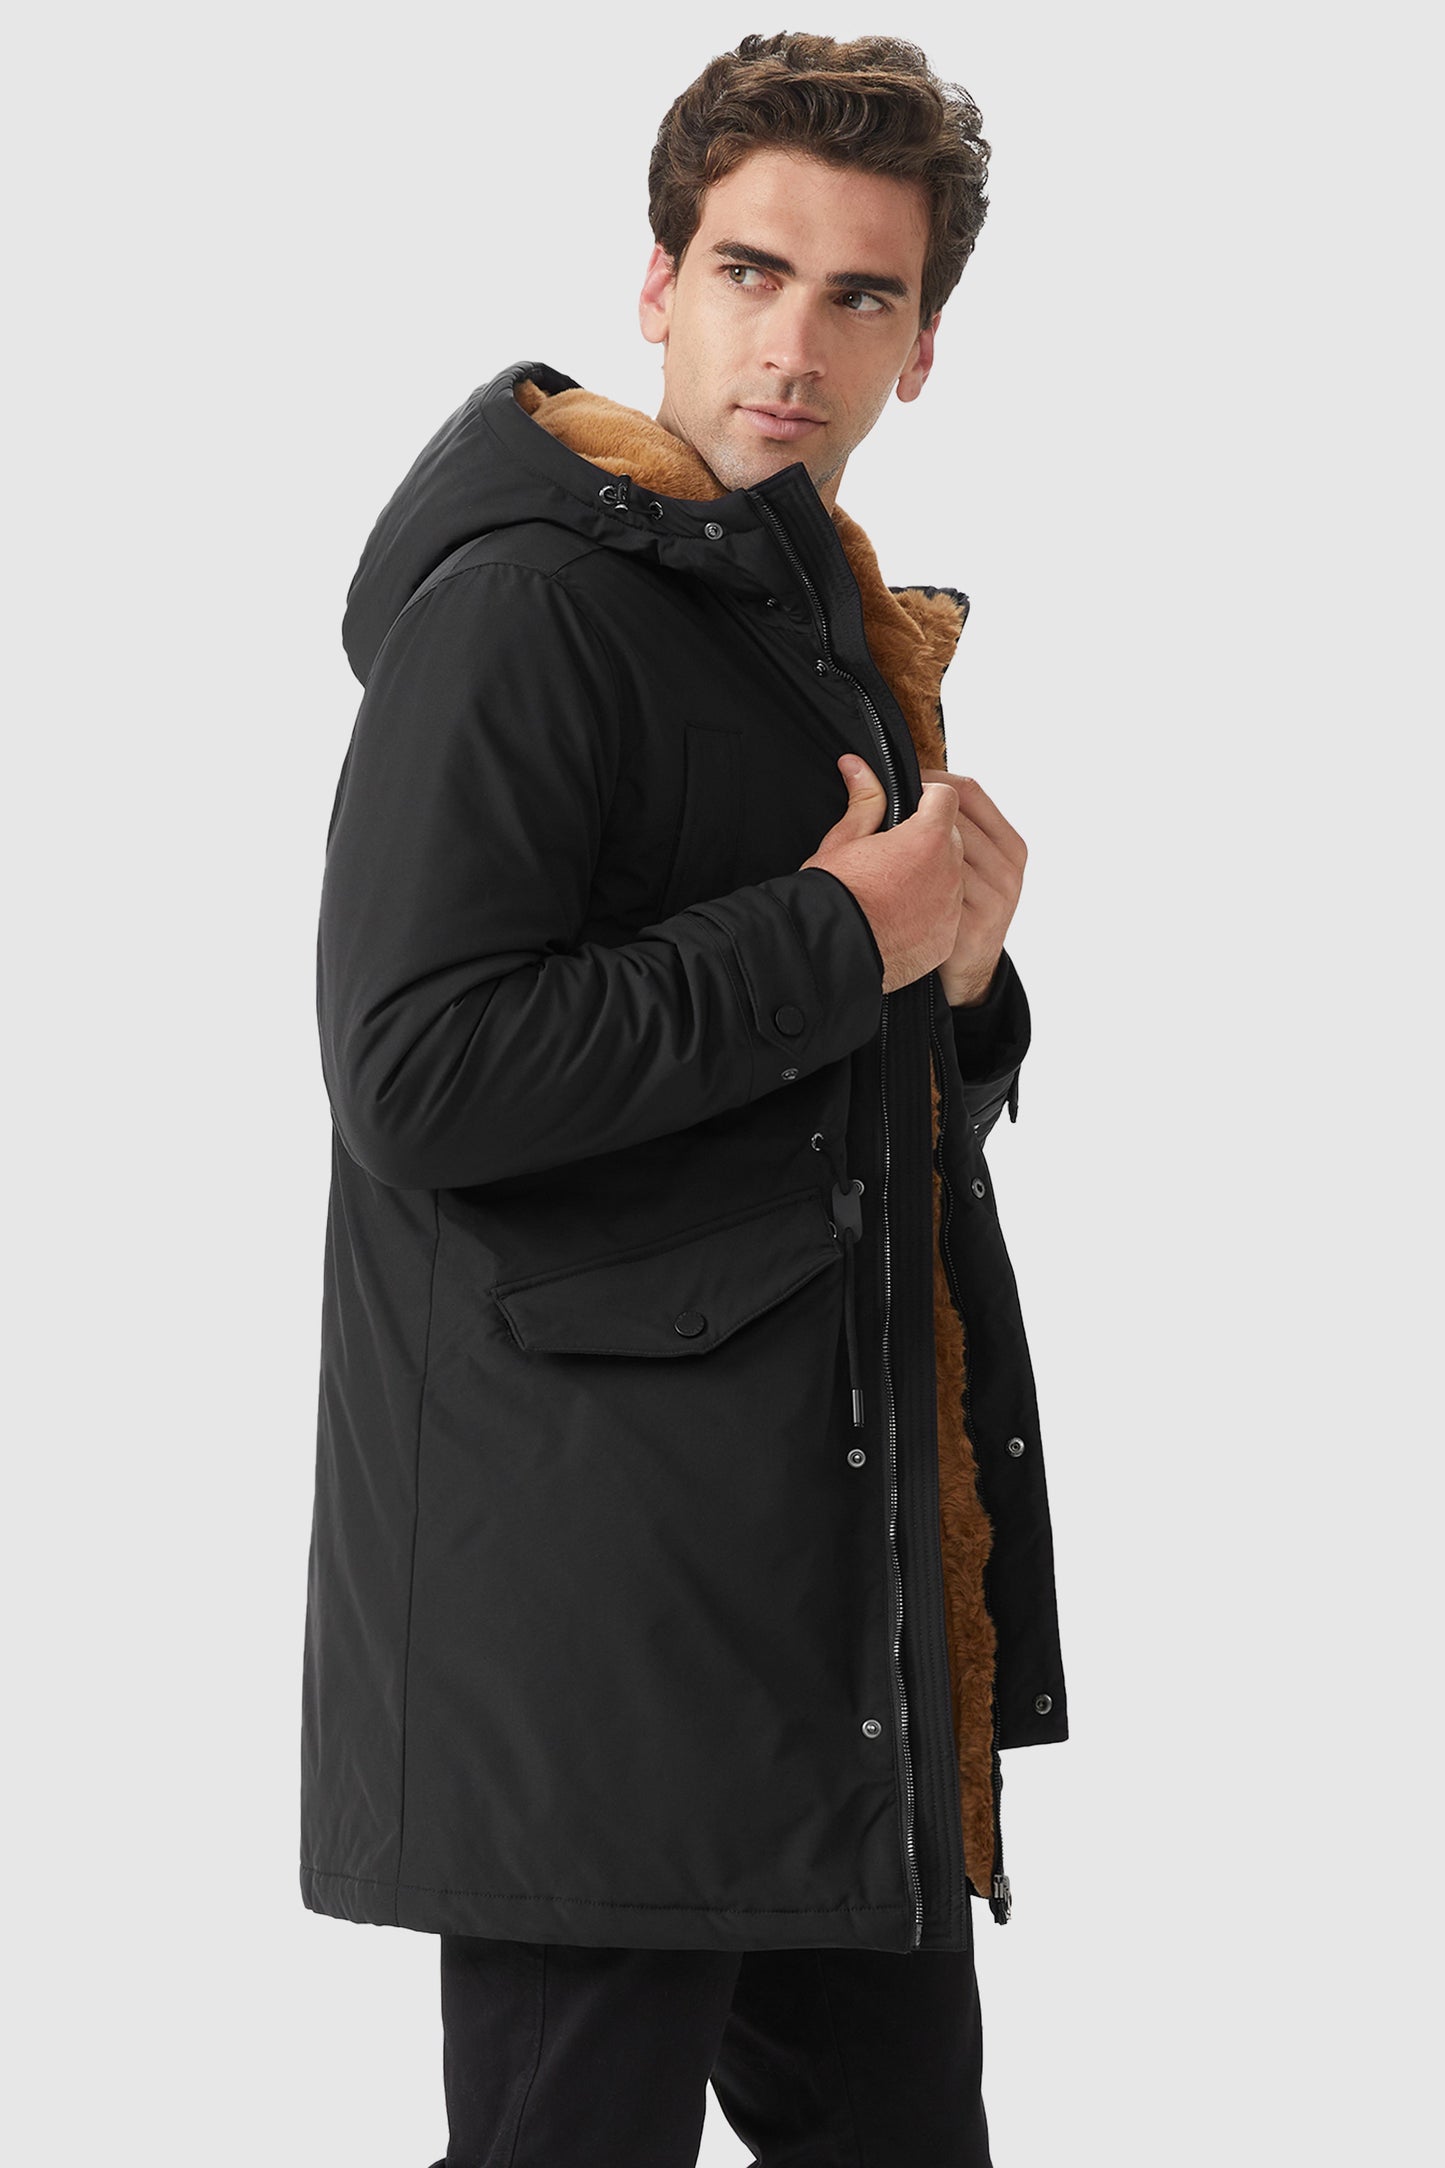 Winter Thicken Parka Jacket with Fleece Lined